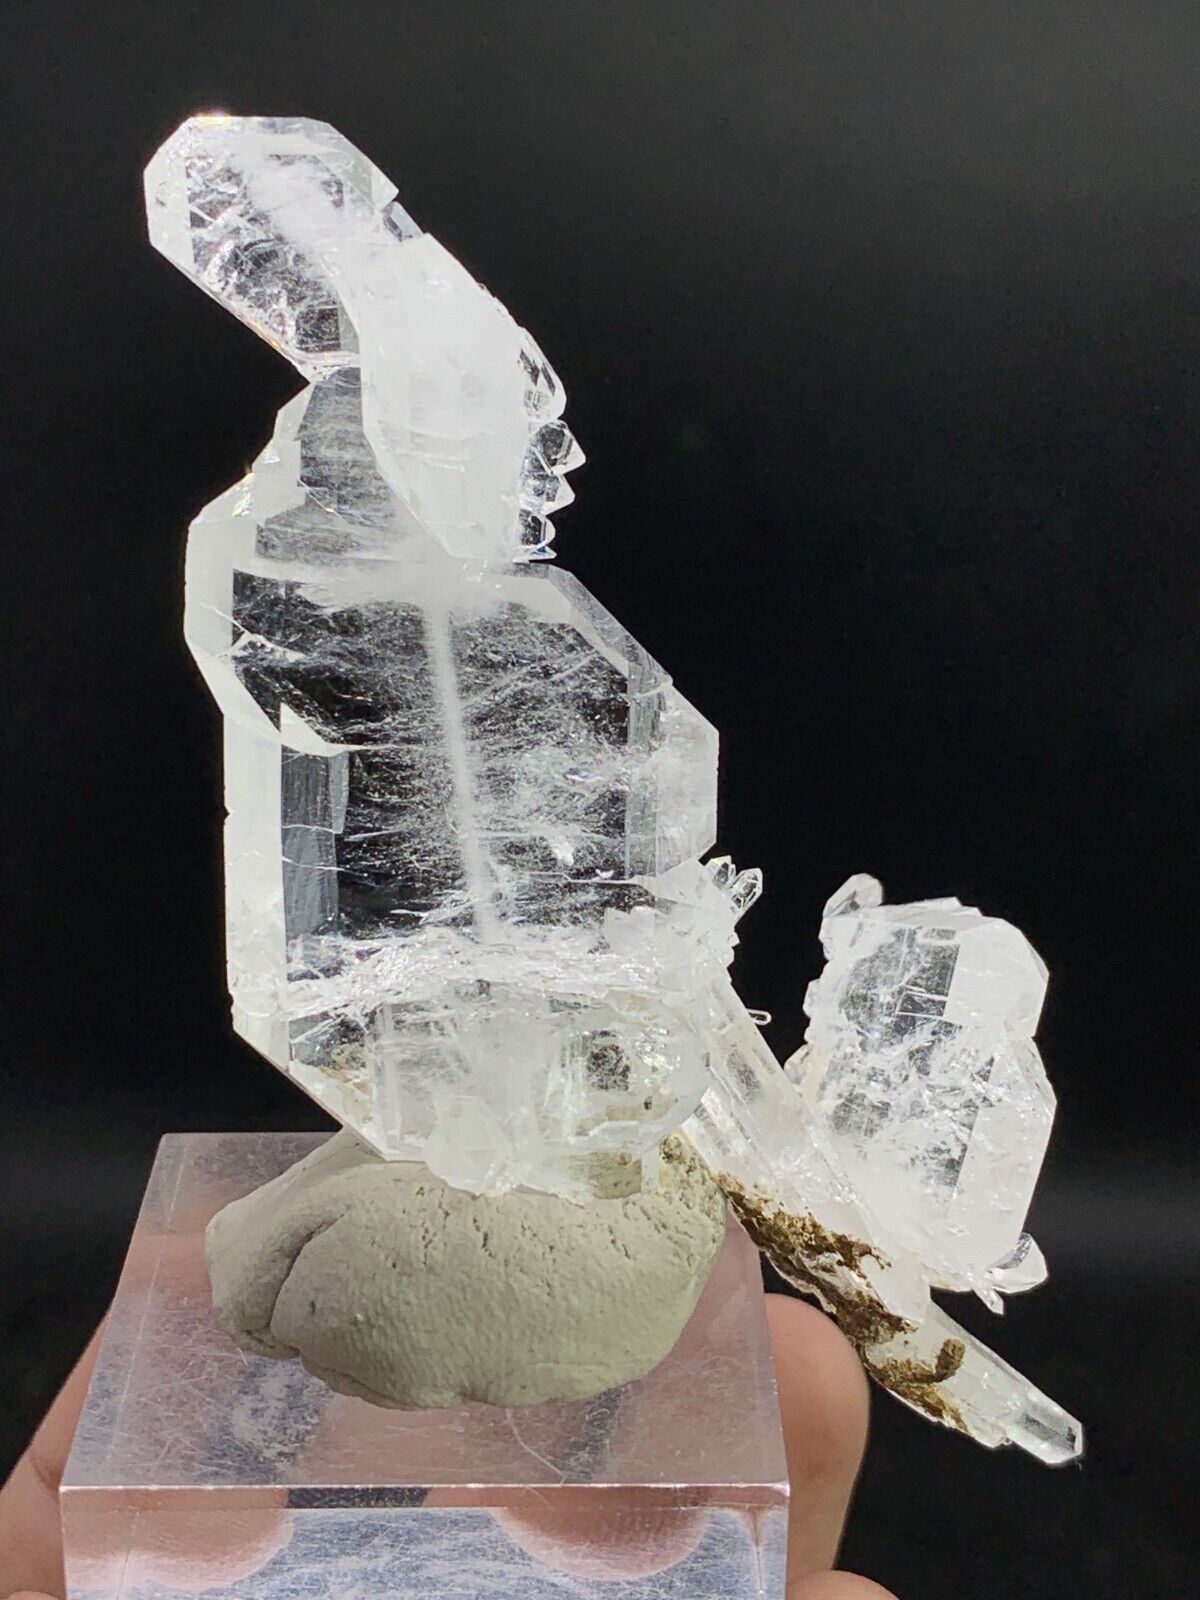 37 Gram Clear Quartz Crystal With Faden Inclusions & Having Sharp Lusters